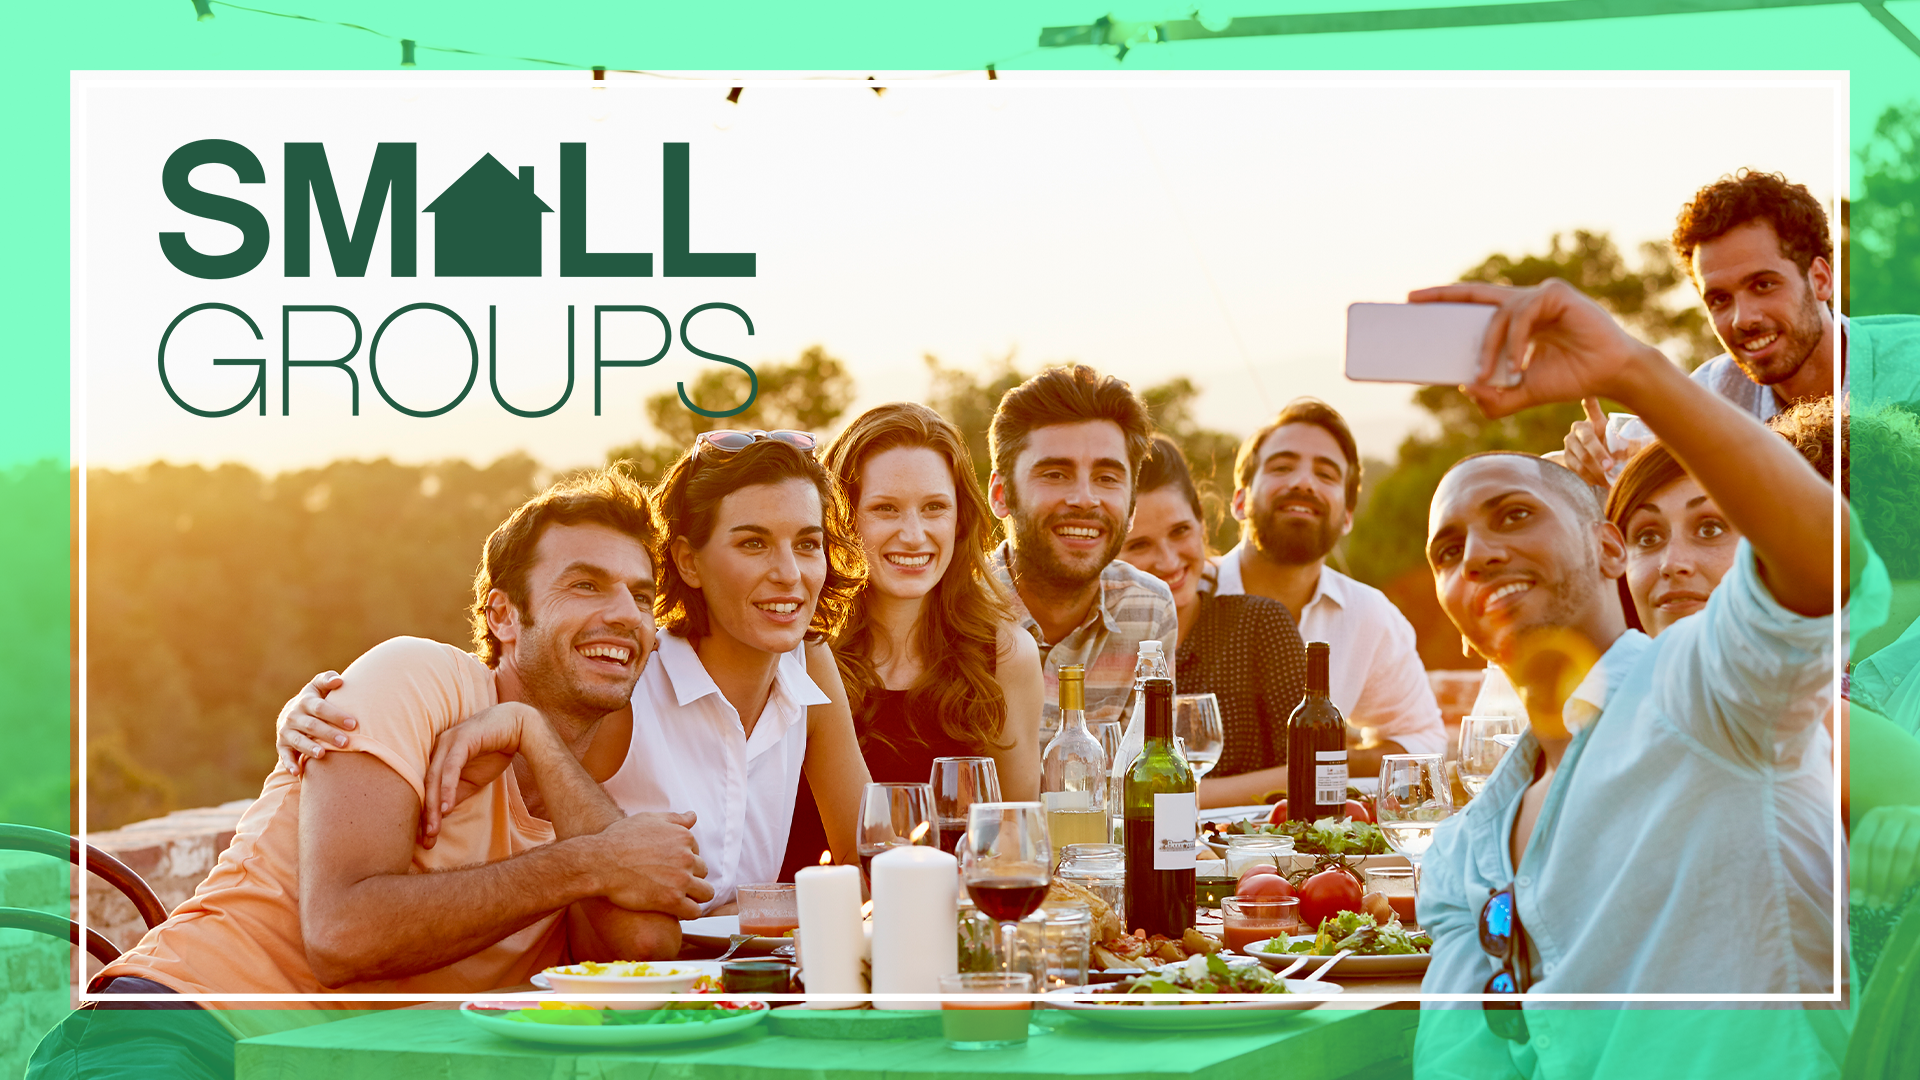 Small Groups - Where Love Grows